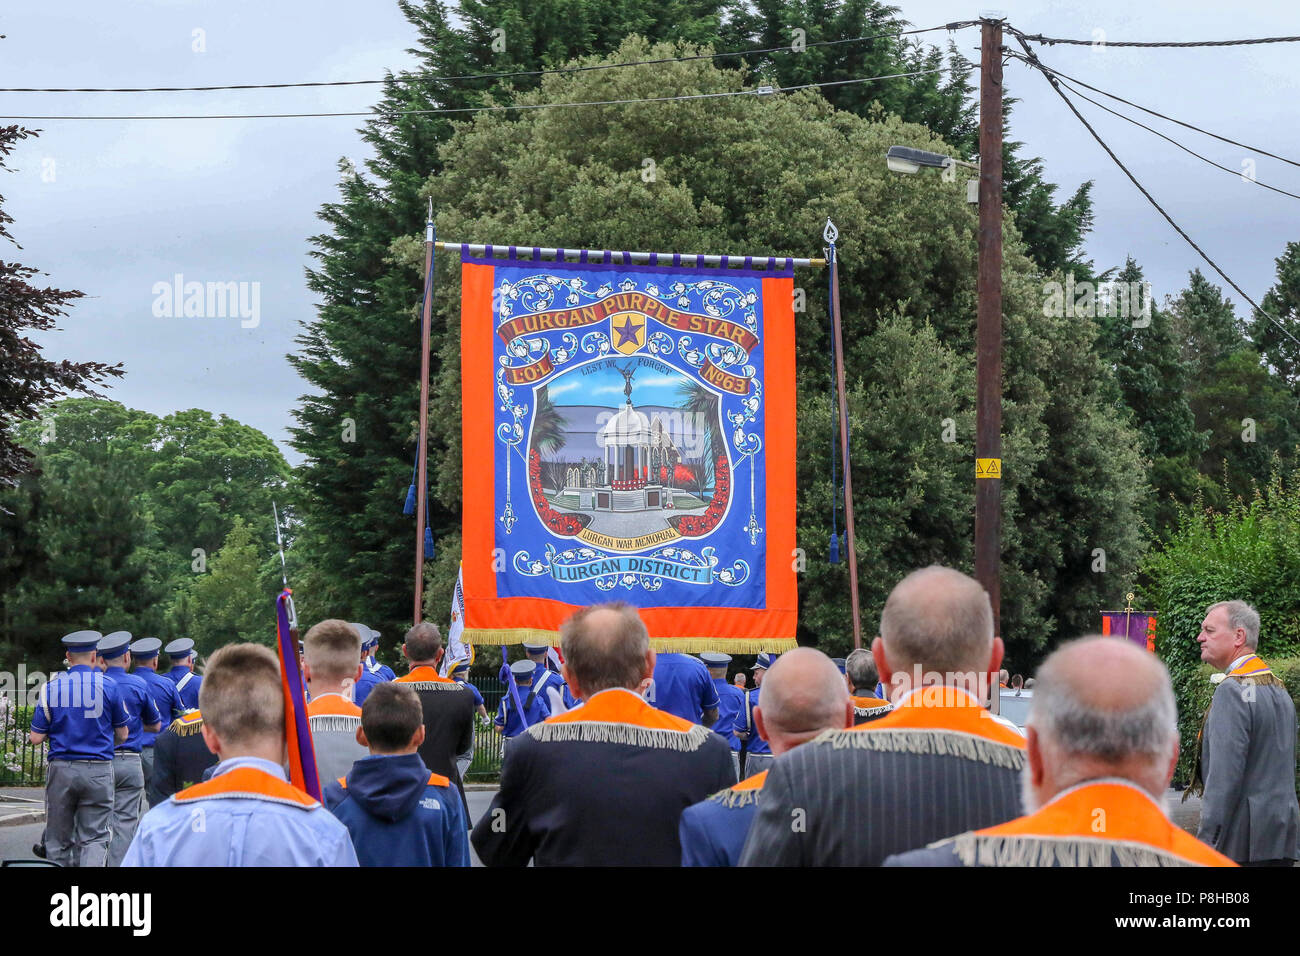 Lurgan, County Armagh, Northern Ireland.12 July 2018. The Twelfth of July is marked by Orange Order parades across Northern Ireland. Lurgan District leave their headquarters at Brownlow House before parading up the town to the war memorial and then head to Loughgall for the main County Armagh demonstration. The parades across Northern Ireland mark the victory of William of Orange over James at the Battle of the Boyne in 1690. Credit: CAZIMB/Alamy Live News. Stock Photo